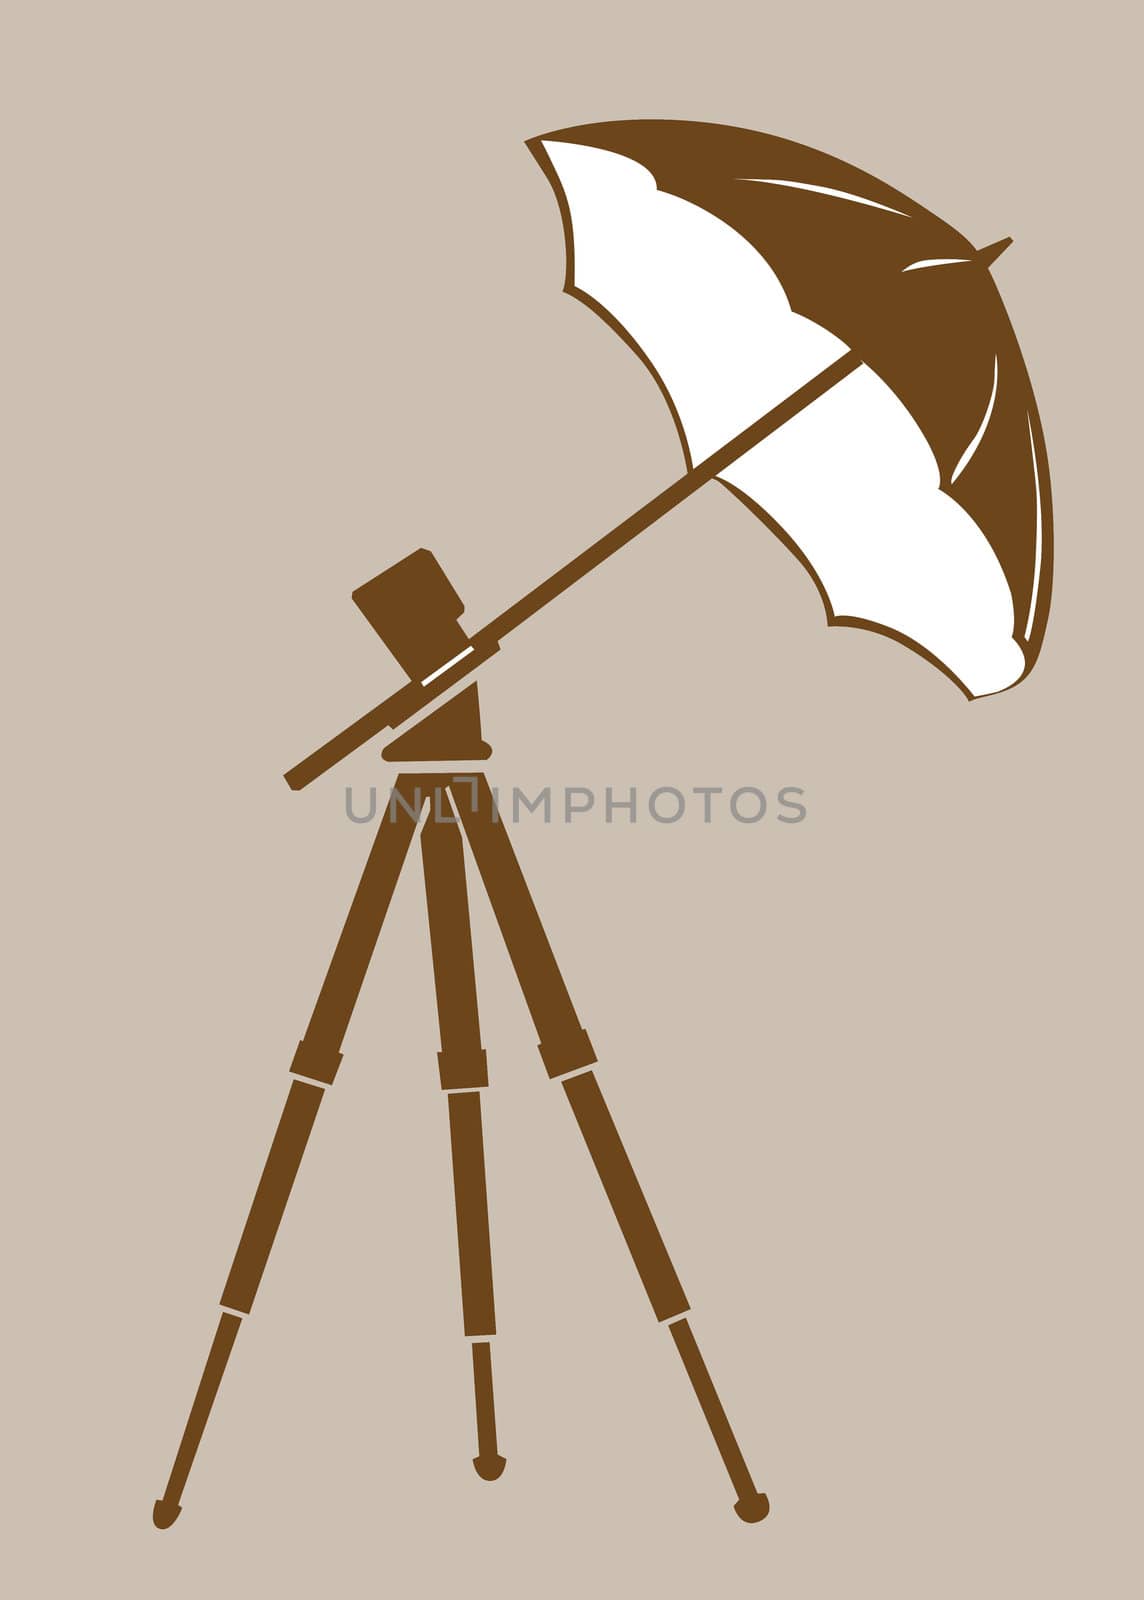 tripod silhouette on brown background